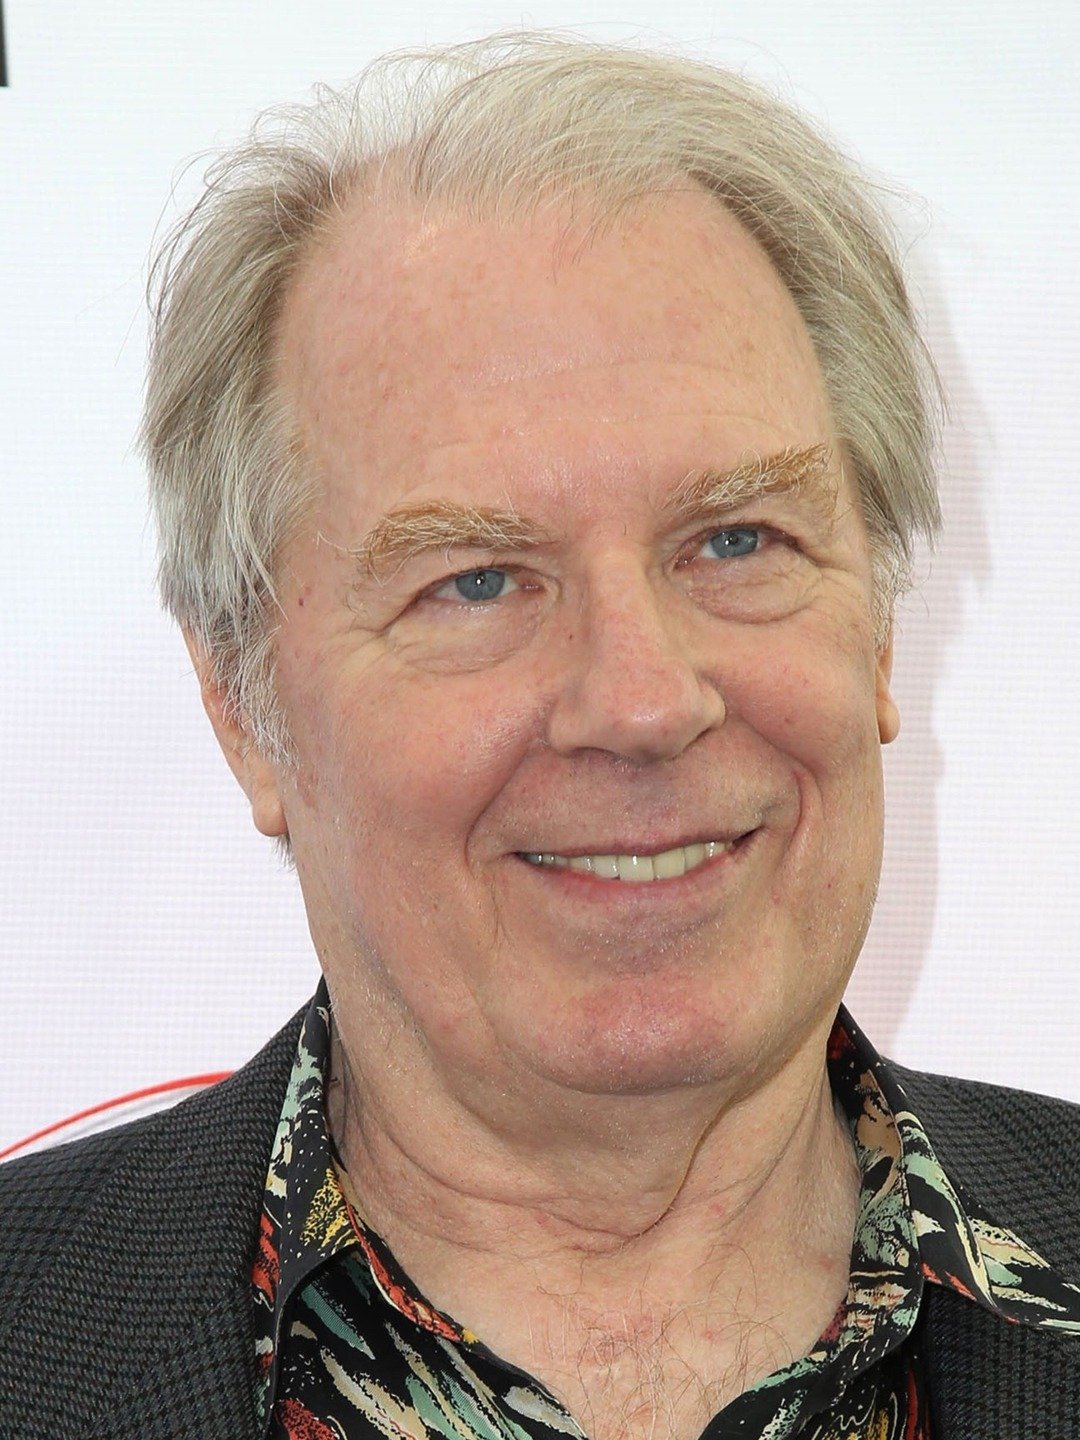 How tall is Michael McKean?